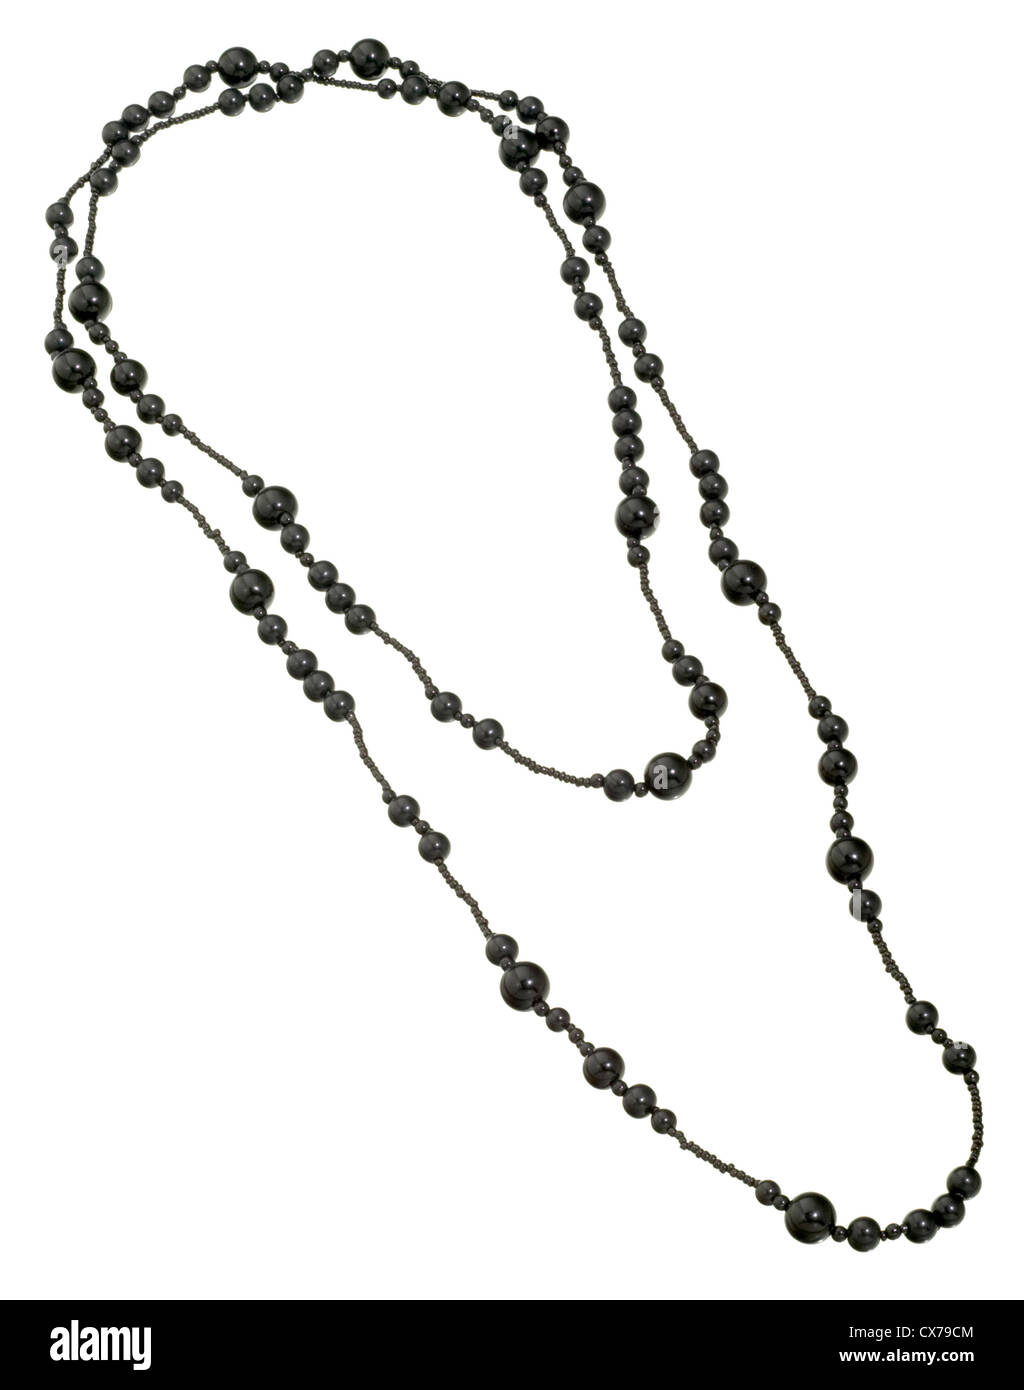 Black beaded necklace Banque D'Images